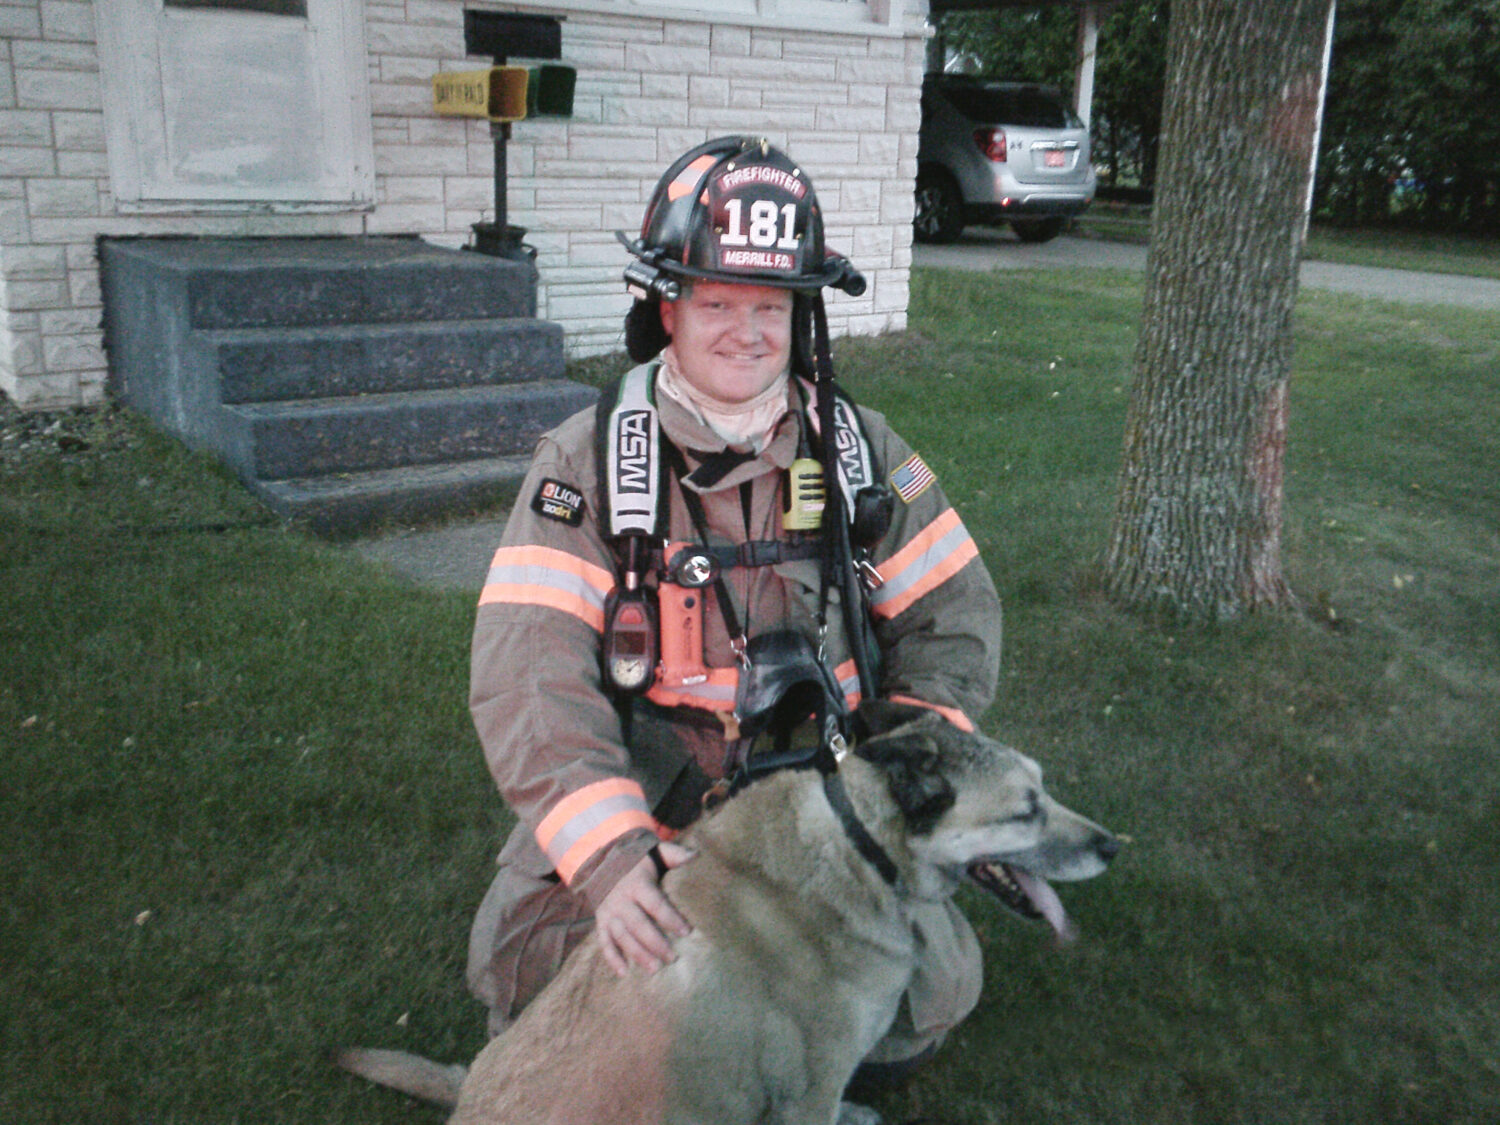 Dog rescued from Merrill house fire